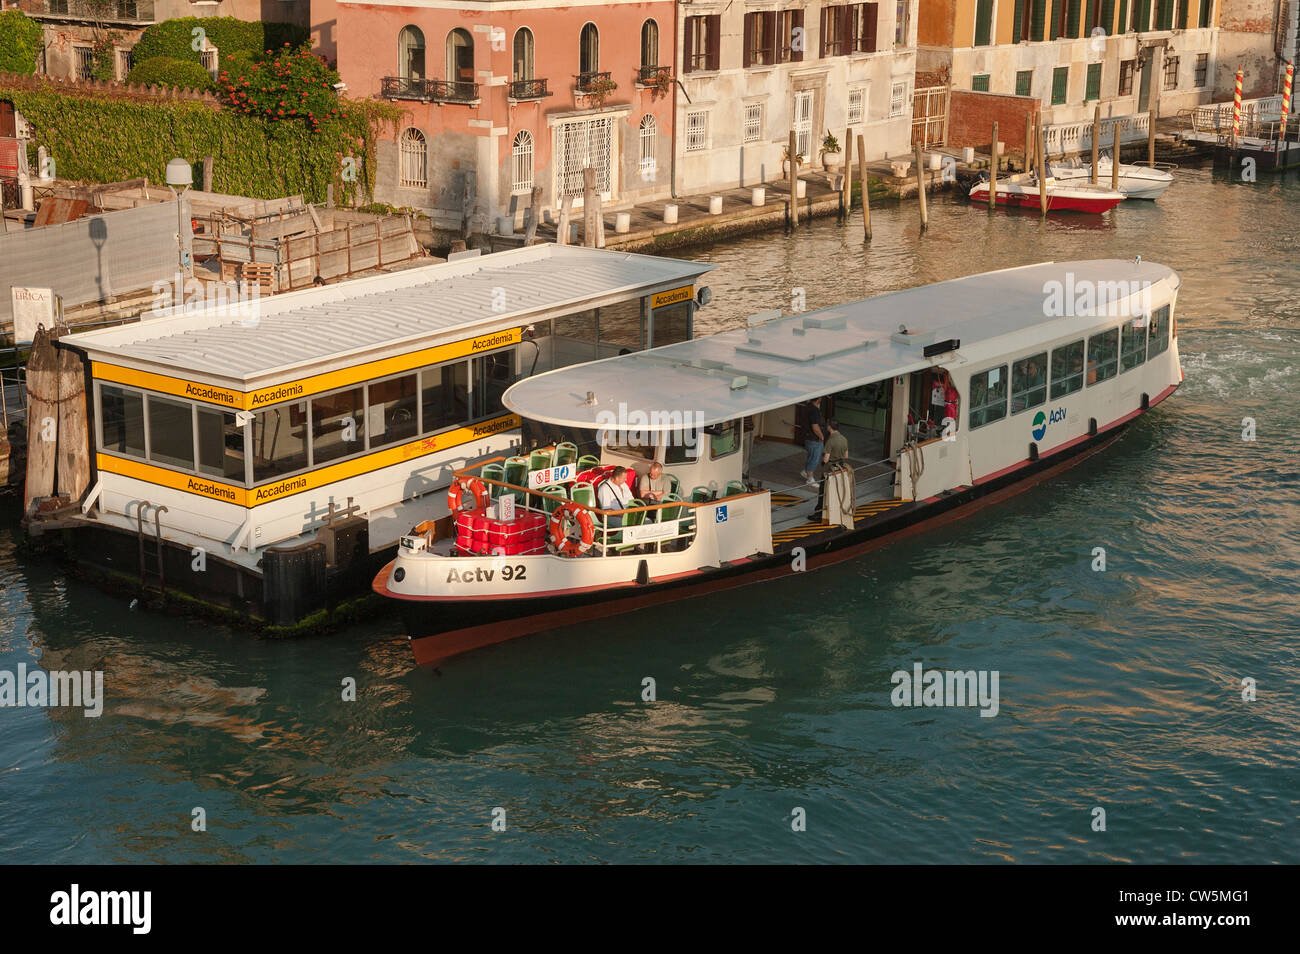 A Valporetto waterbus at the Accademia stop on the Grand Canal Venice Stock Photo